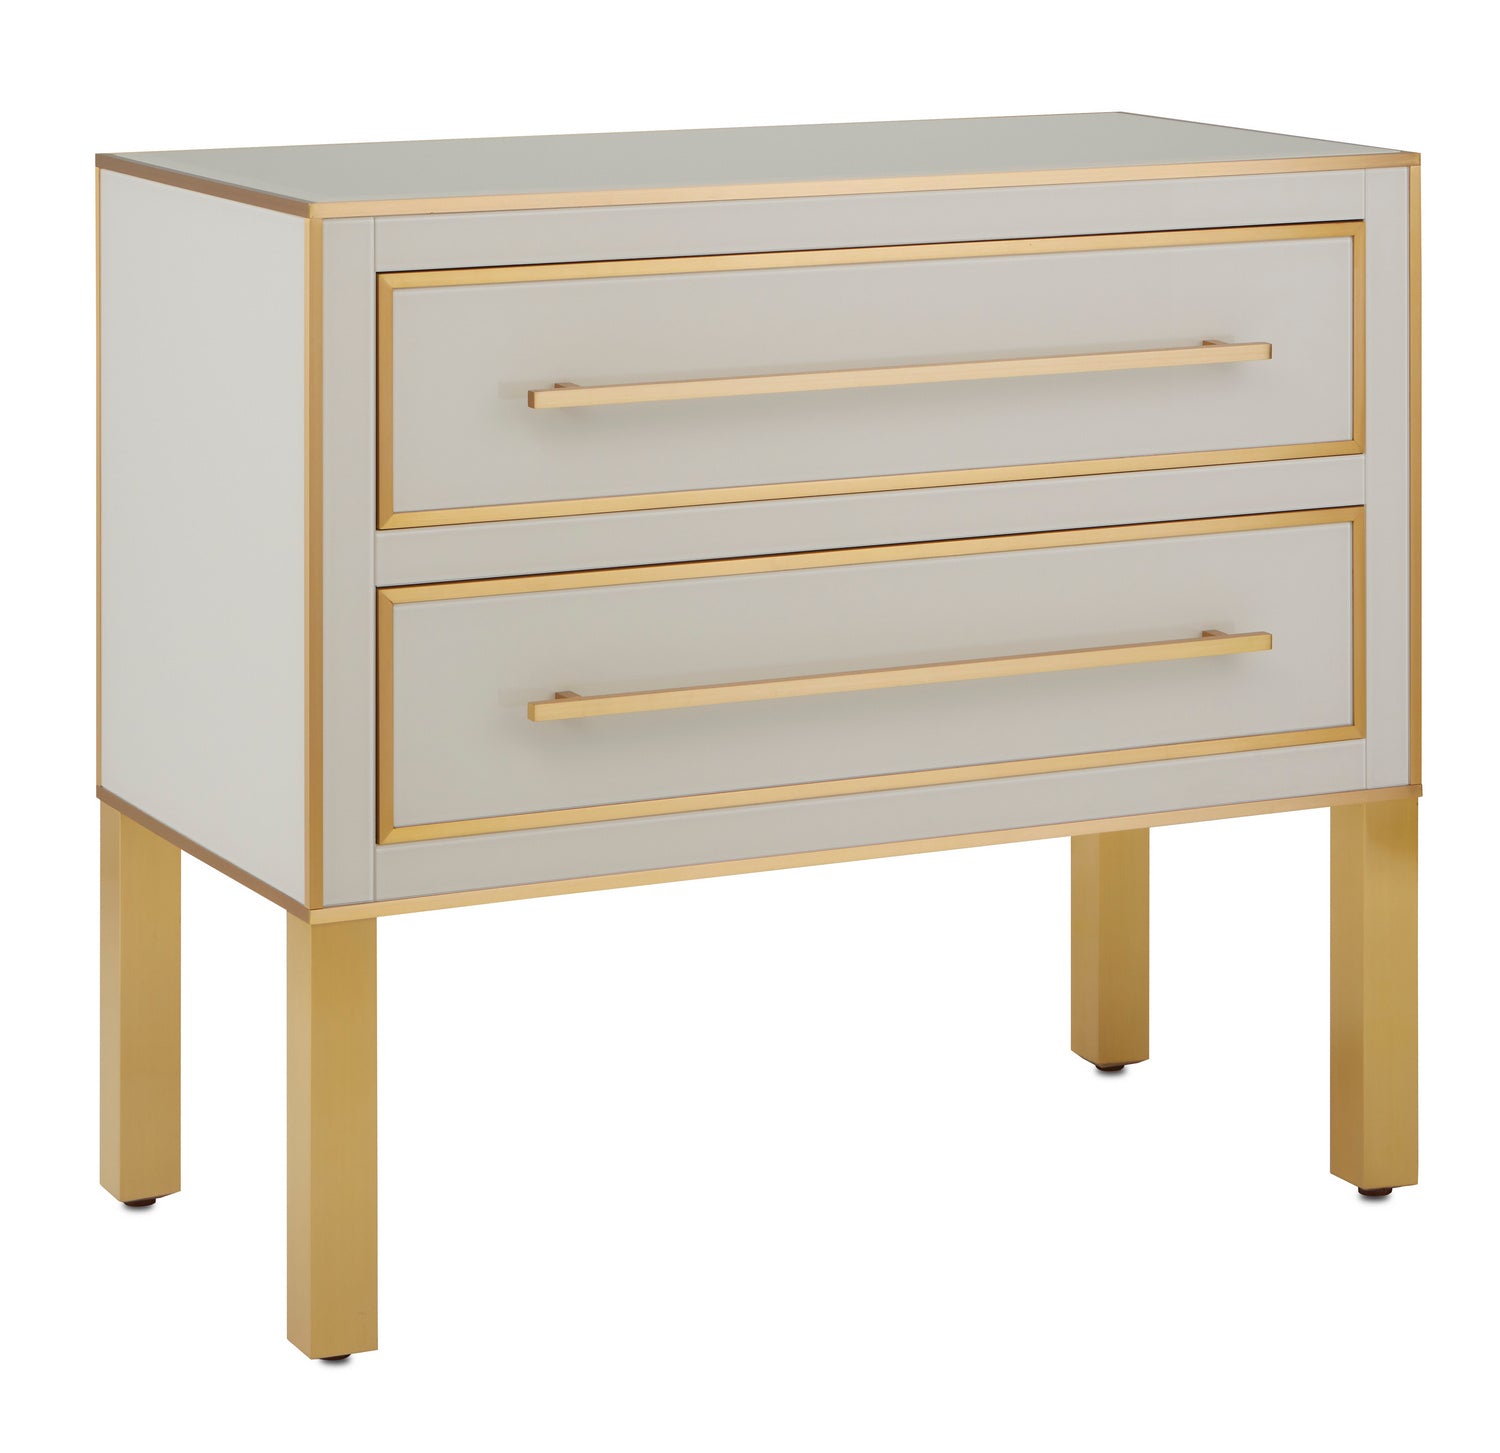 Chest from the Arden collection in Ivory/Satin Brass finish